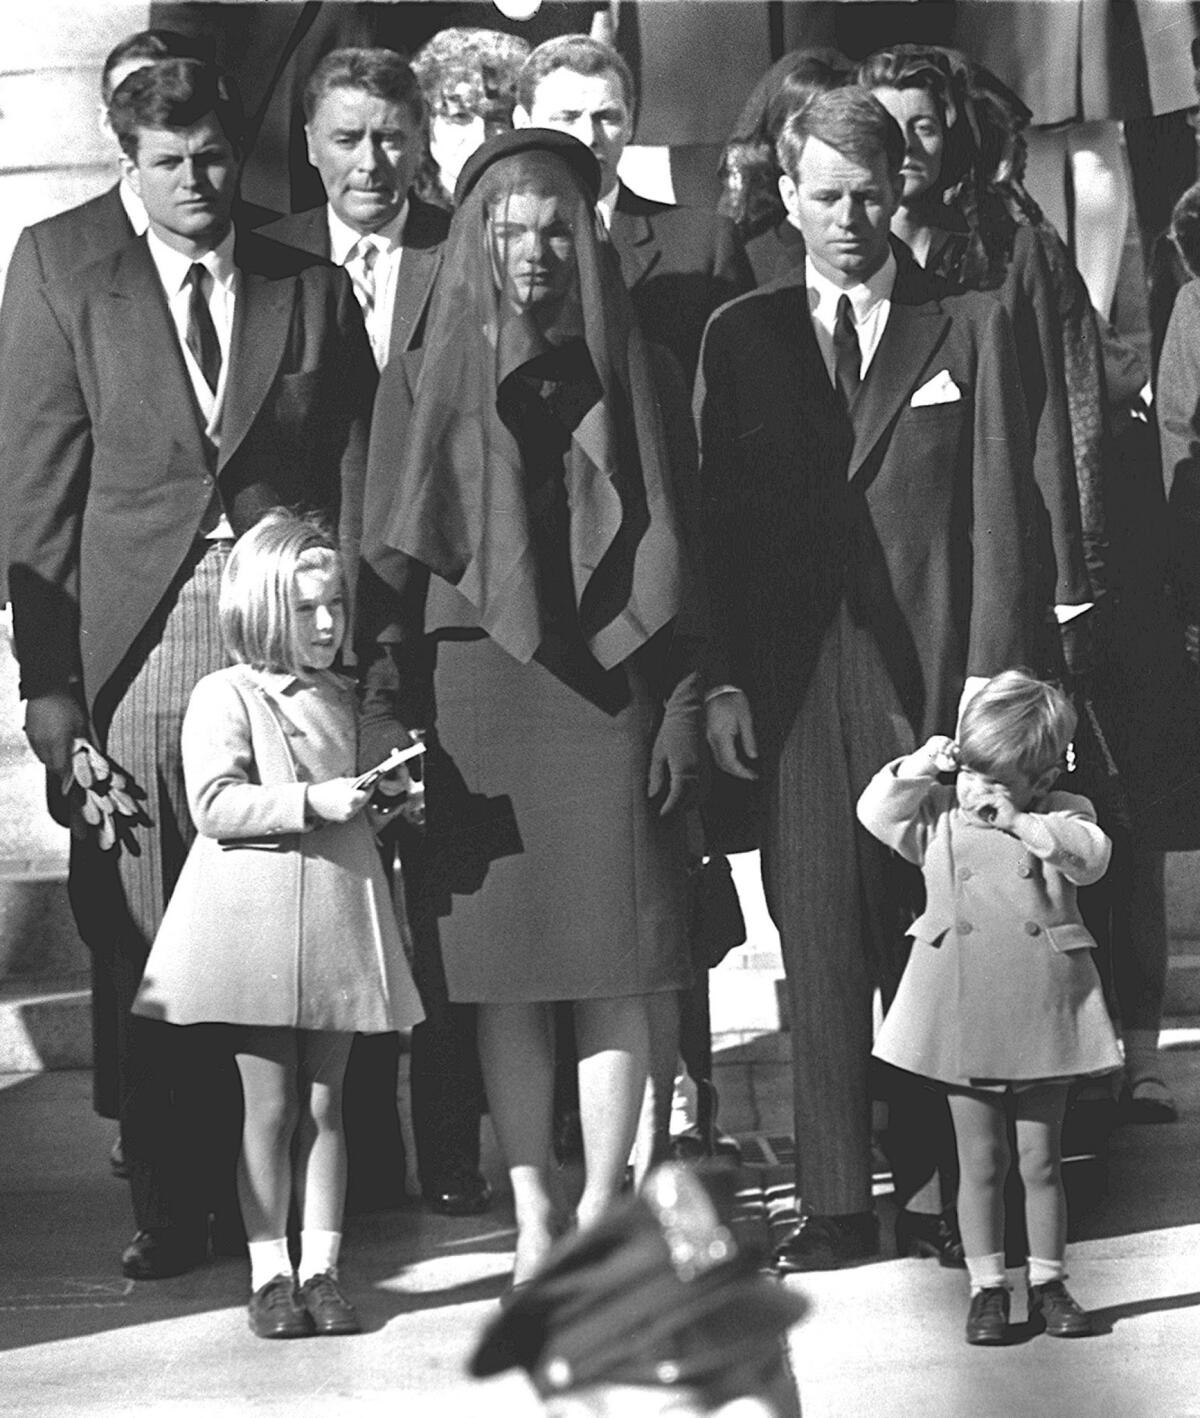 Jacqueline Kennedy stands with her two children, Caroline Kennedy and John F. Kennedy Jr., and brothers-in-law Ted Kennedy, back left, and Robert Kennedy, right, at the funeral of her husband, President John F. Kennedy, in Washington.